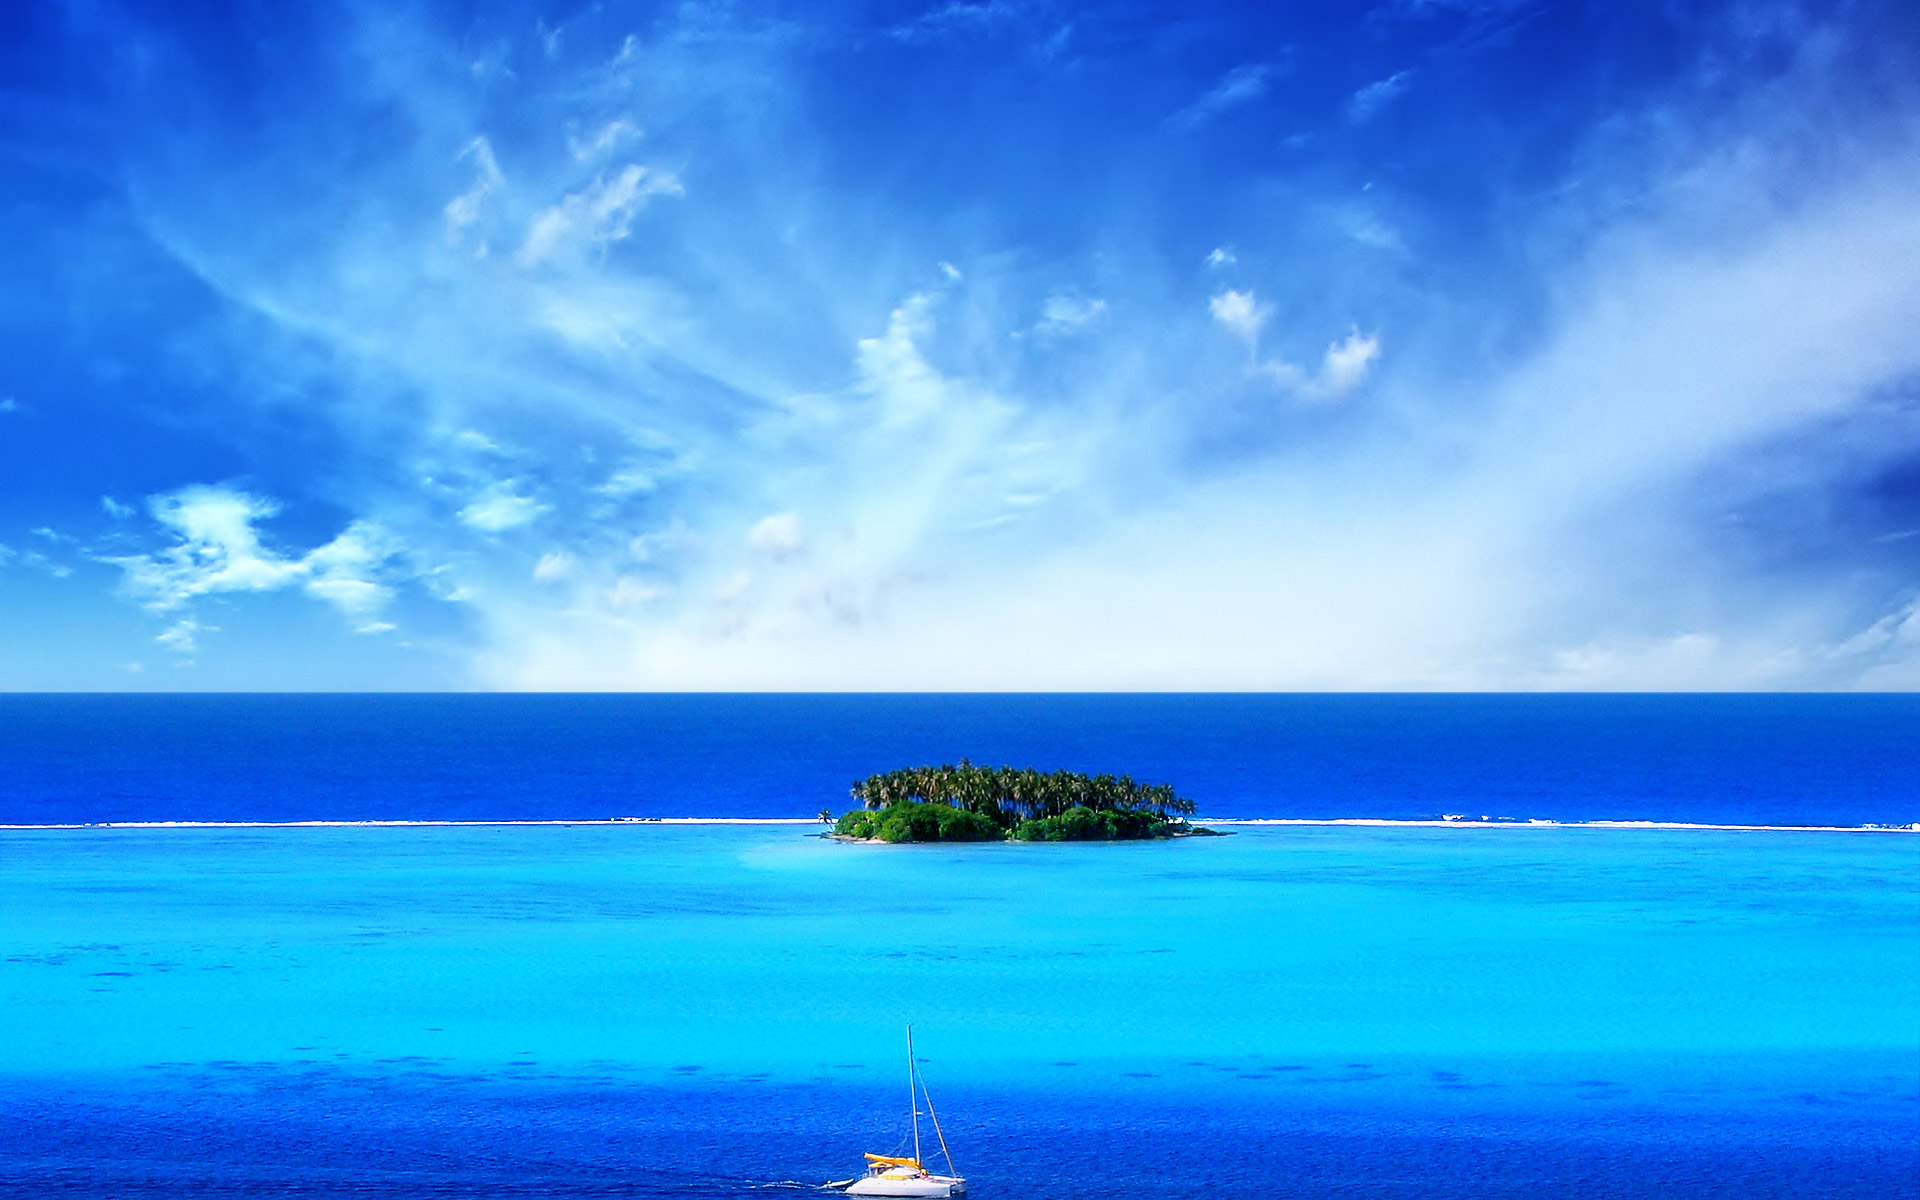 Wallpaper Category Of HD Summer Screensavers Is